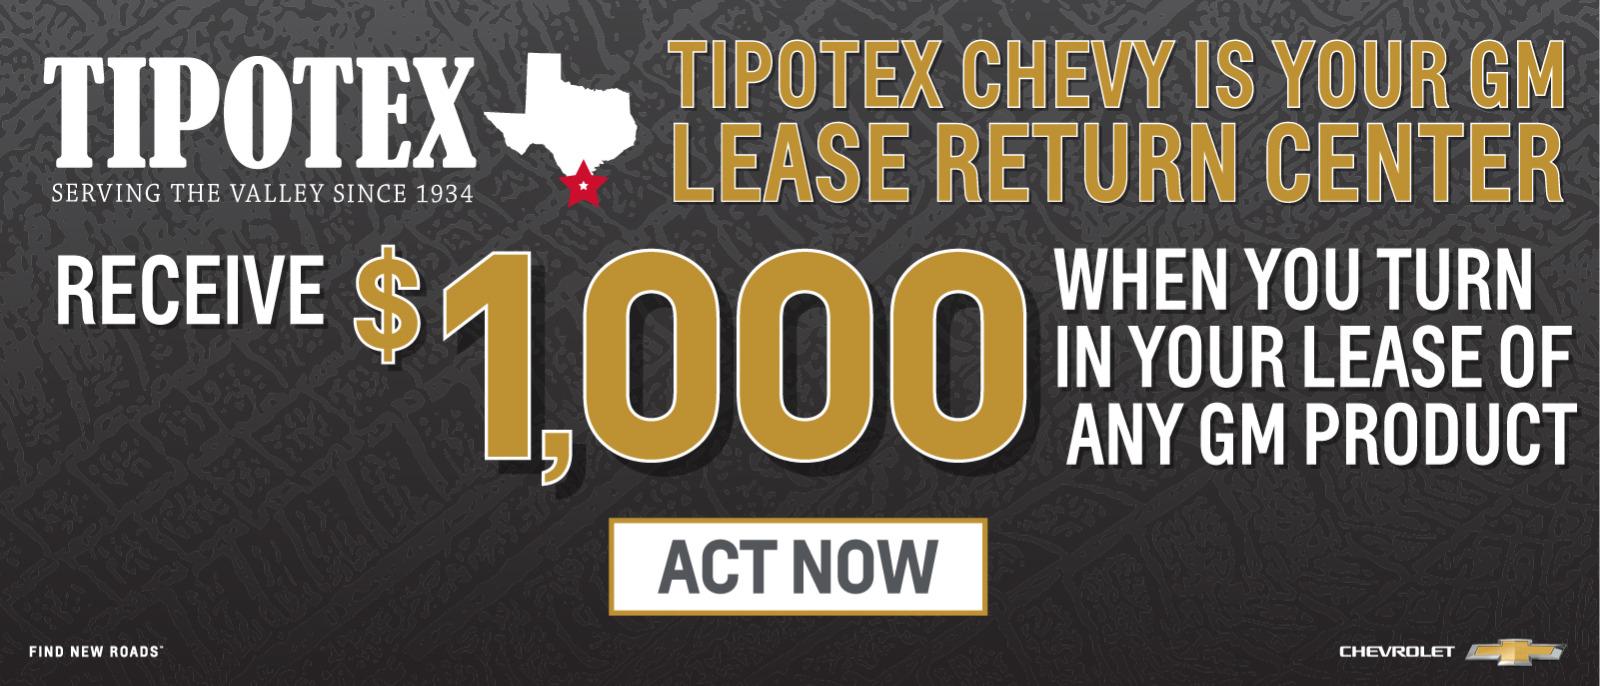 TIPOTEX CHEVY IS YOUR GM LEASE RETURN CENTER - RECEIVE $1,000 WHEN YOU TURN IN YOUR LEASE OF ANY GM PRODUCT